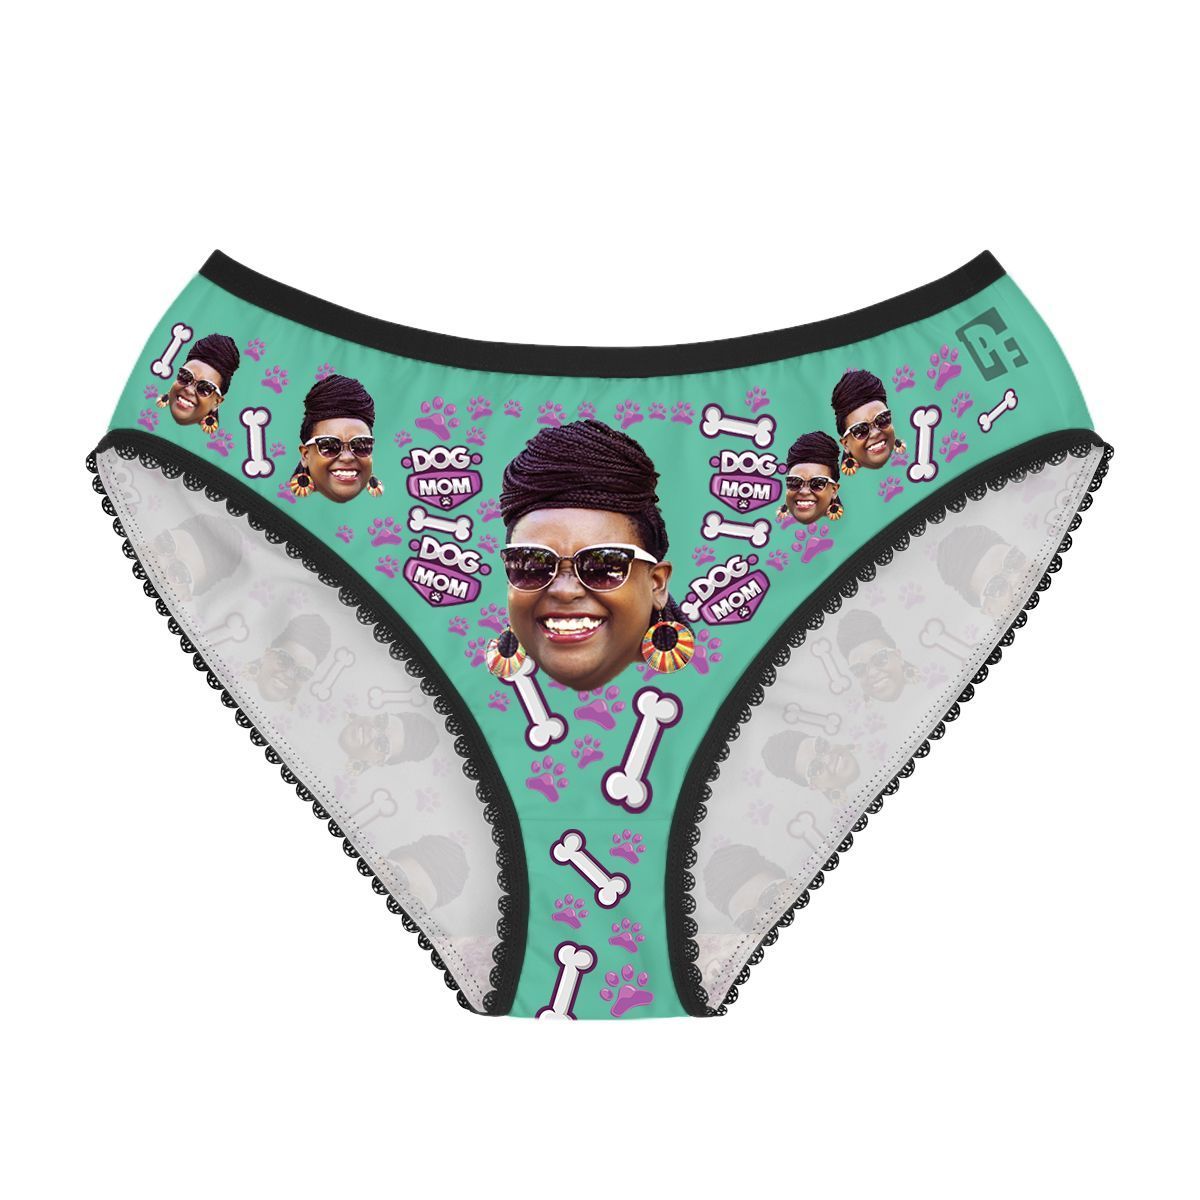 Mint Dog mom women's underwear briefs personalized with photo printed on them